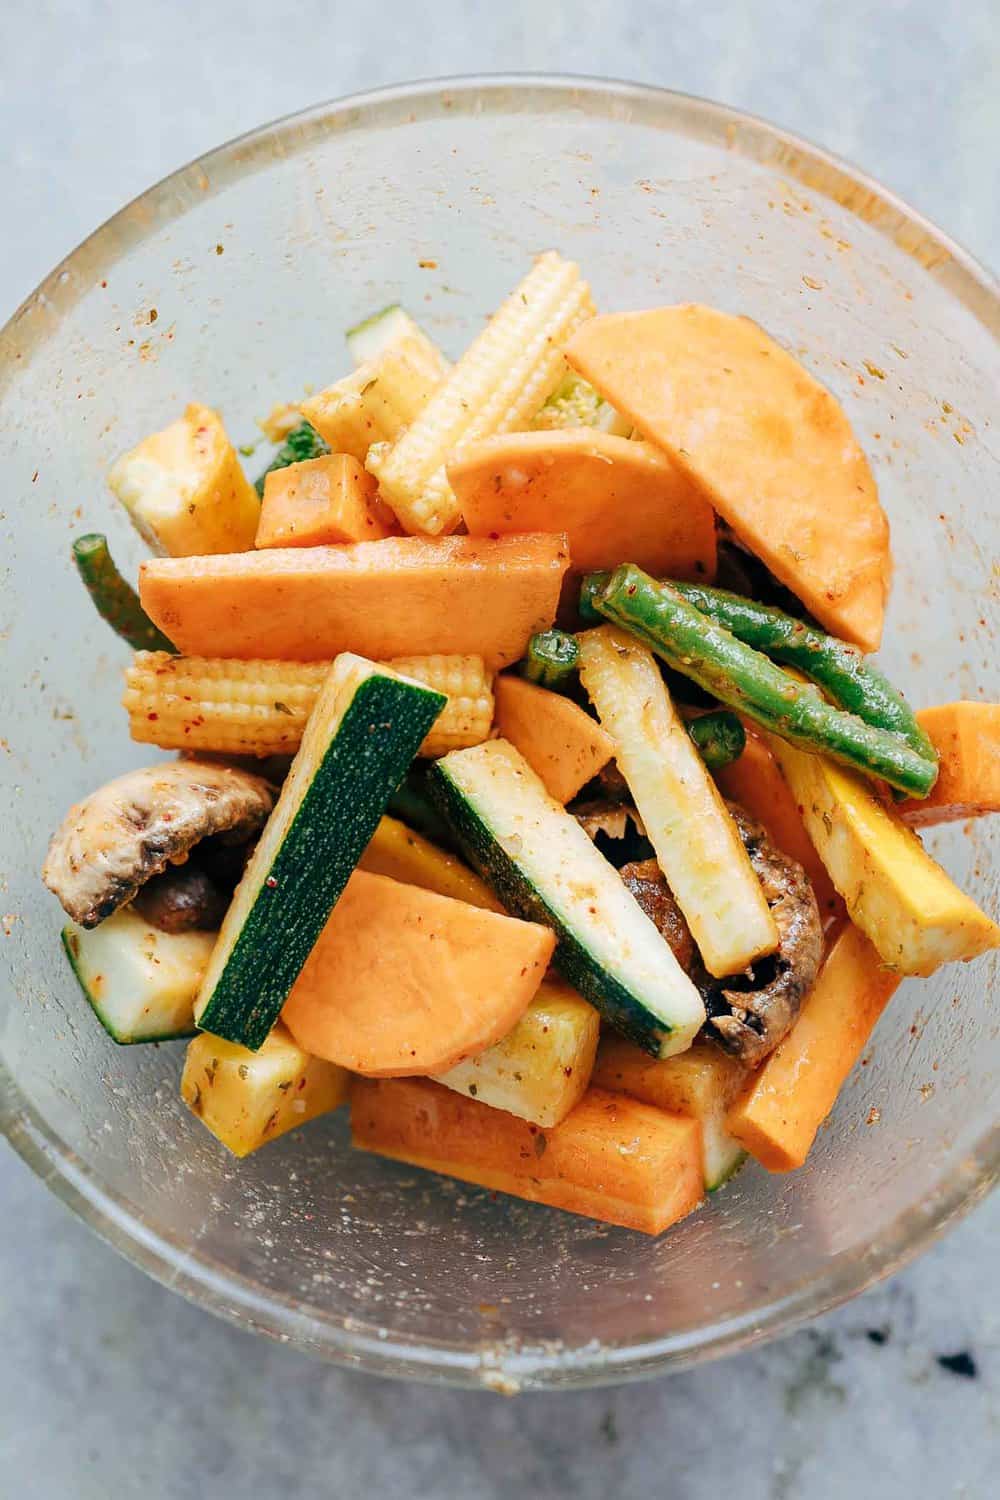 Veggies stacked and seasoned in a bowl.